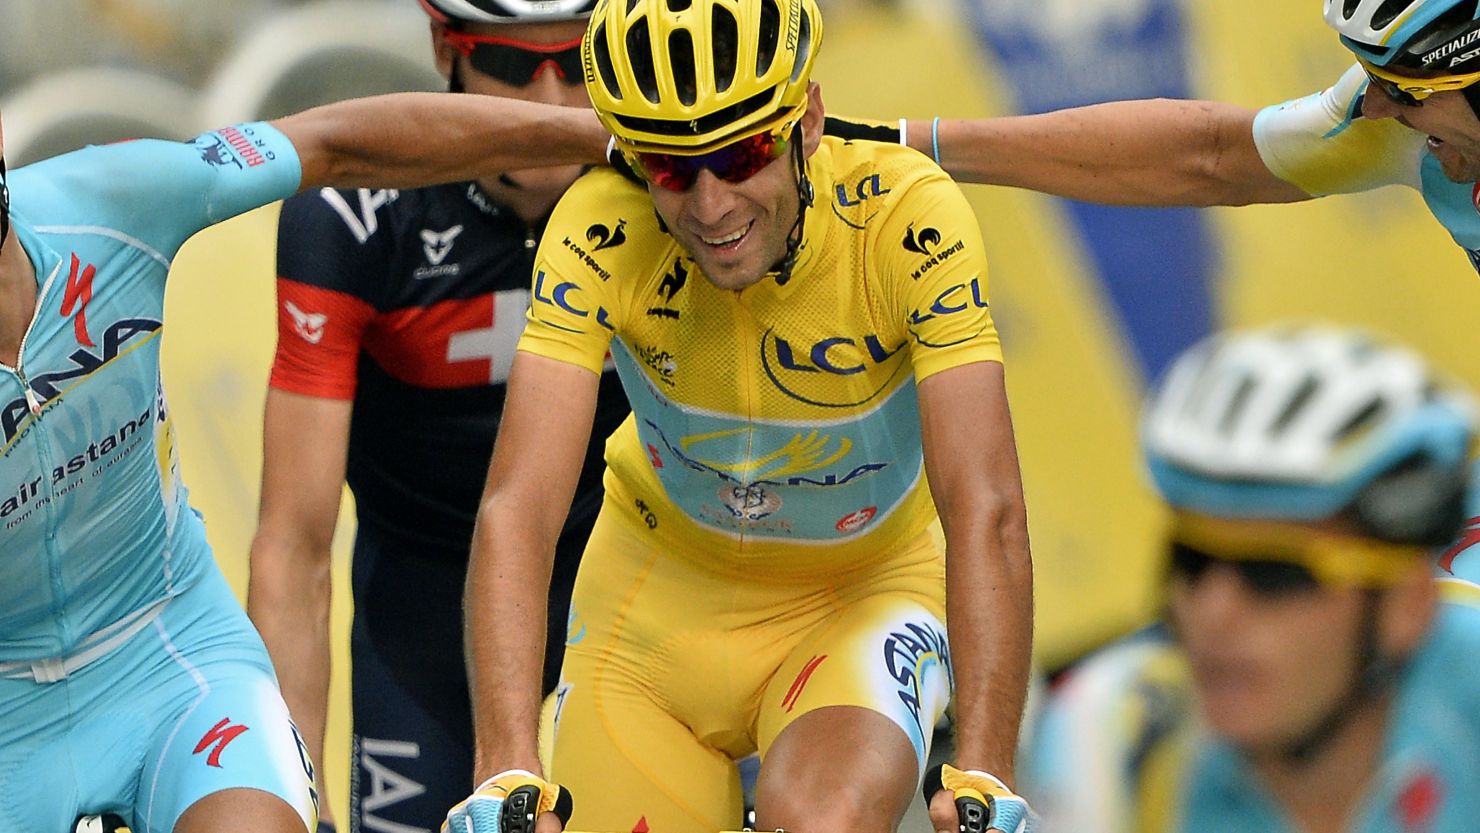 Vincenzo Nibali is congratulated by his Astana teammates after completing his yellow jersey triumph in the 2014 Tour de France